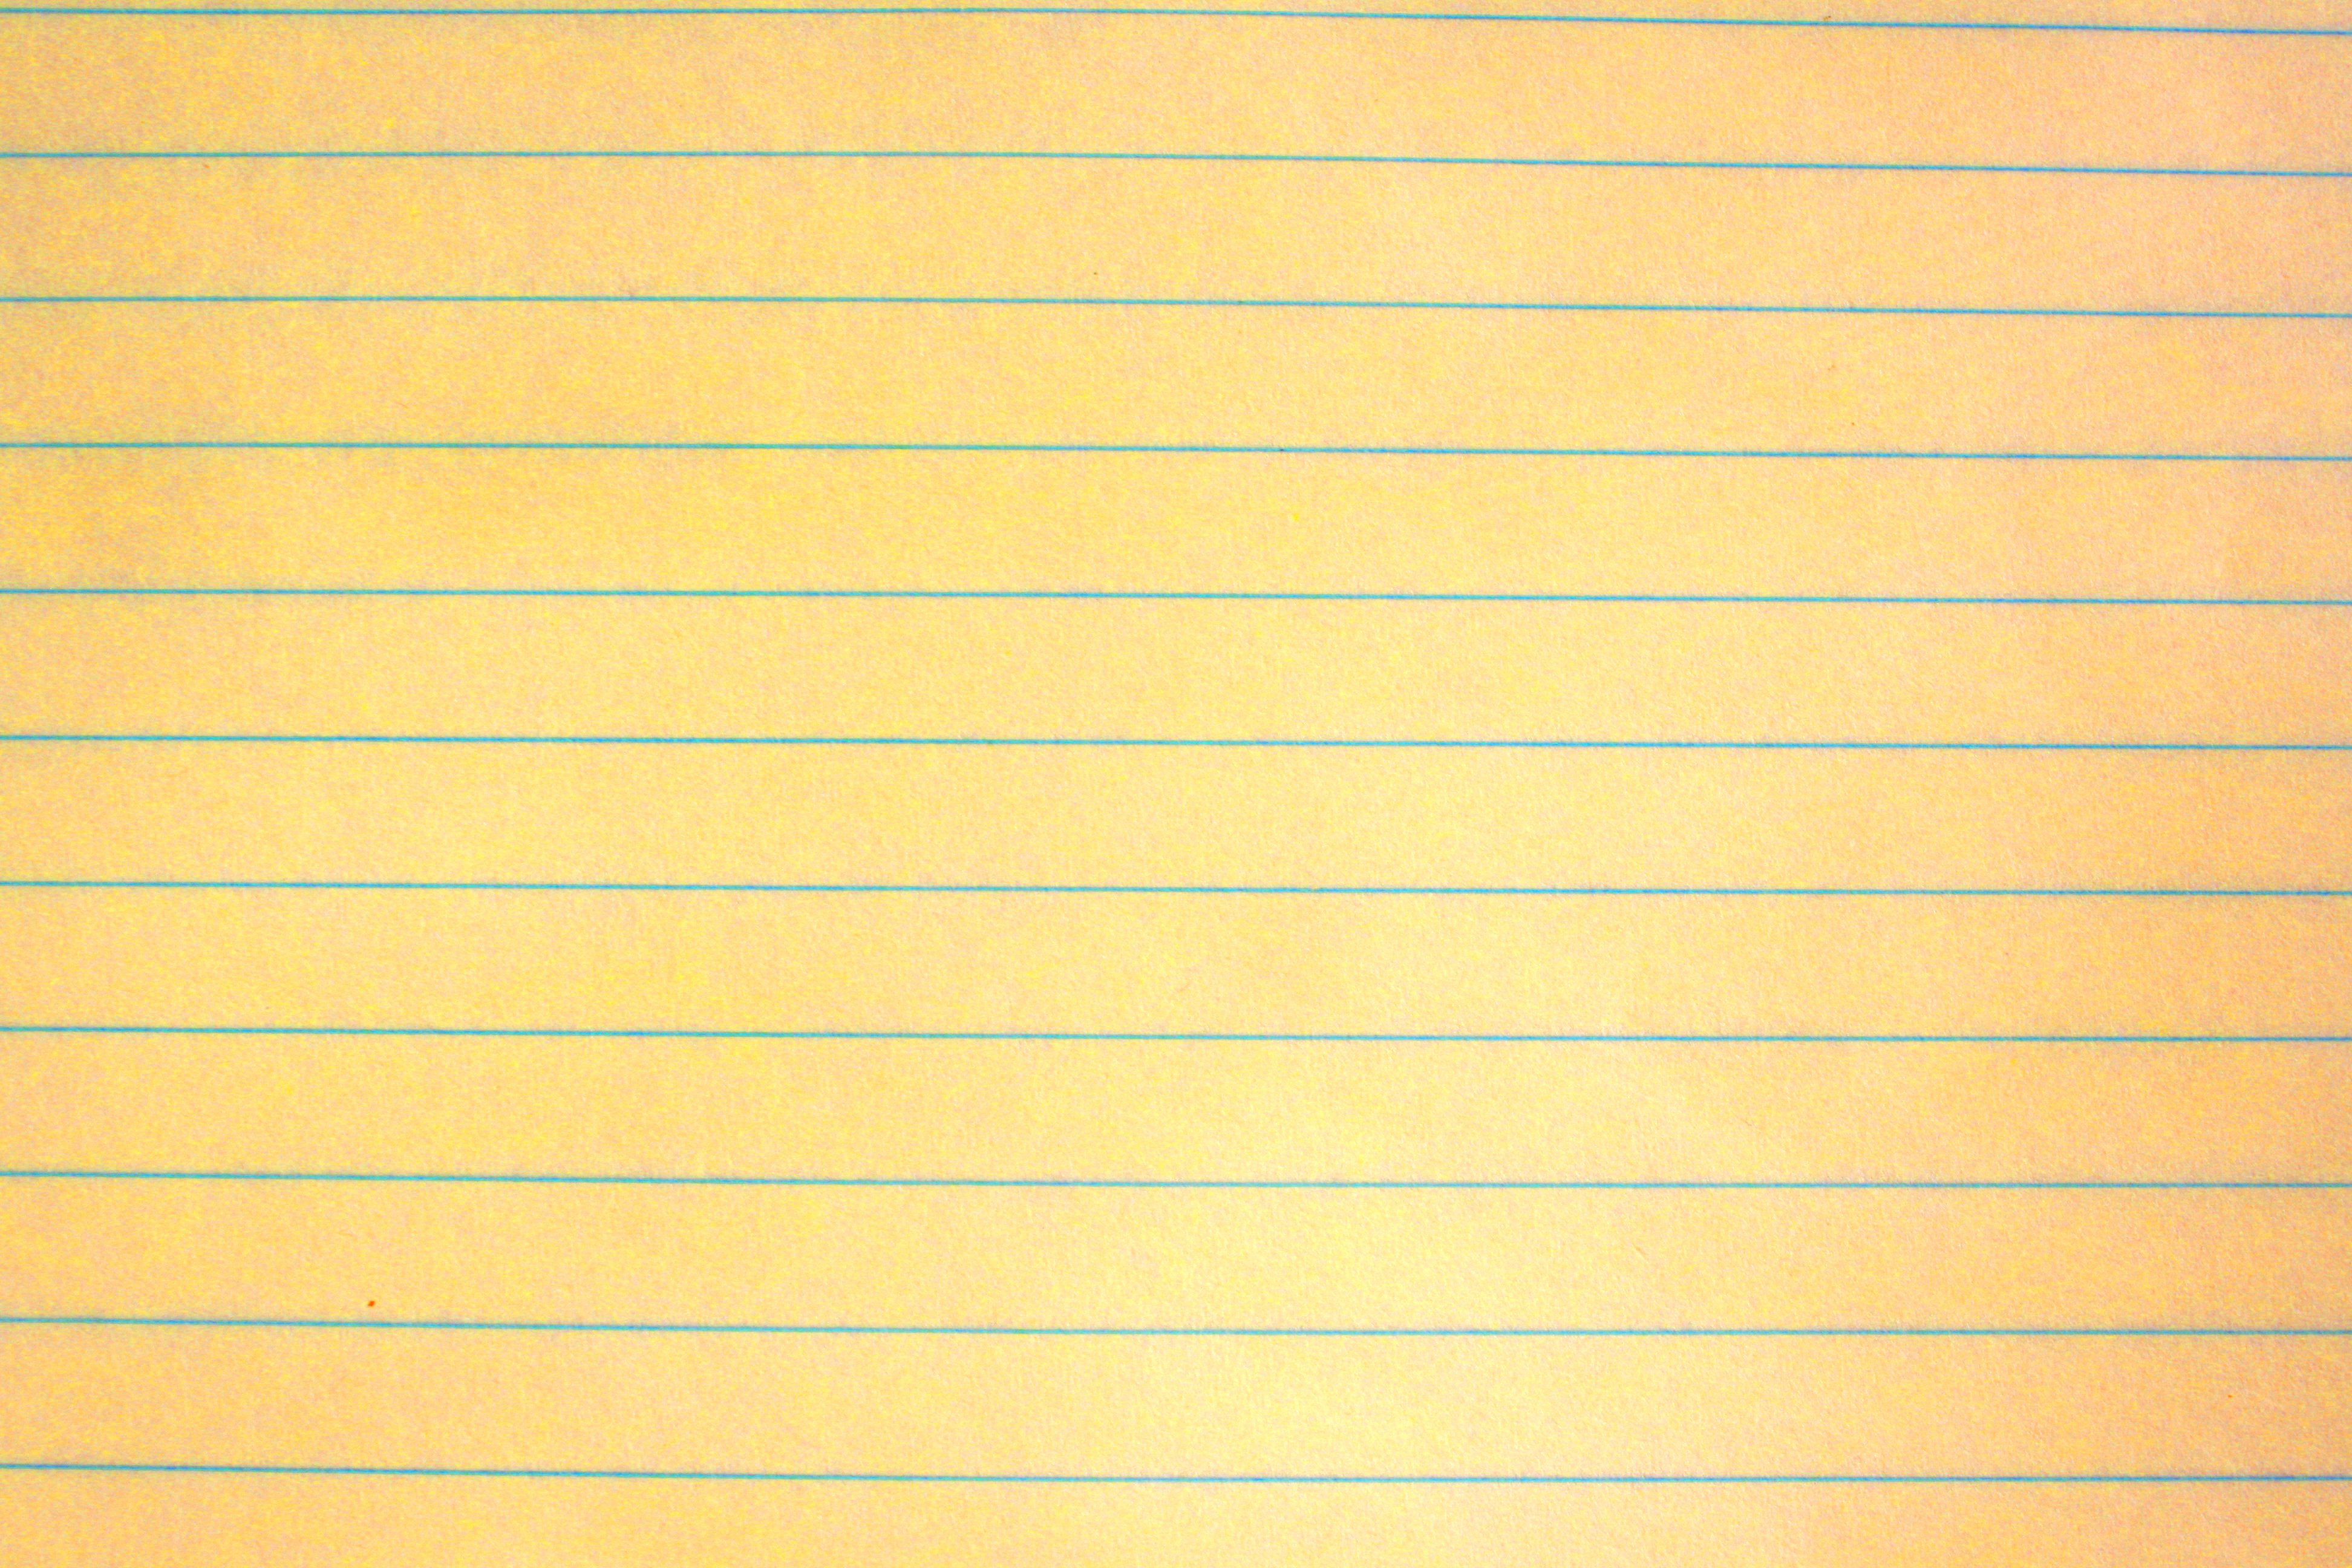 yellow note paper background